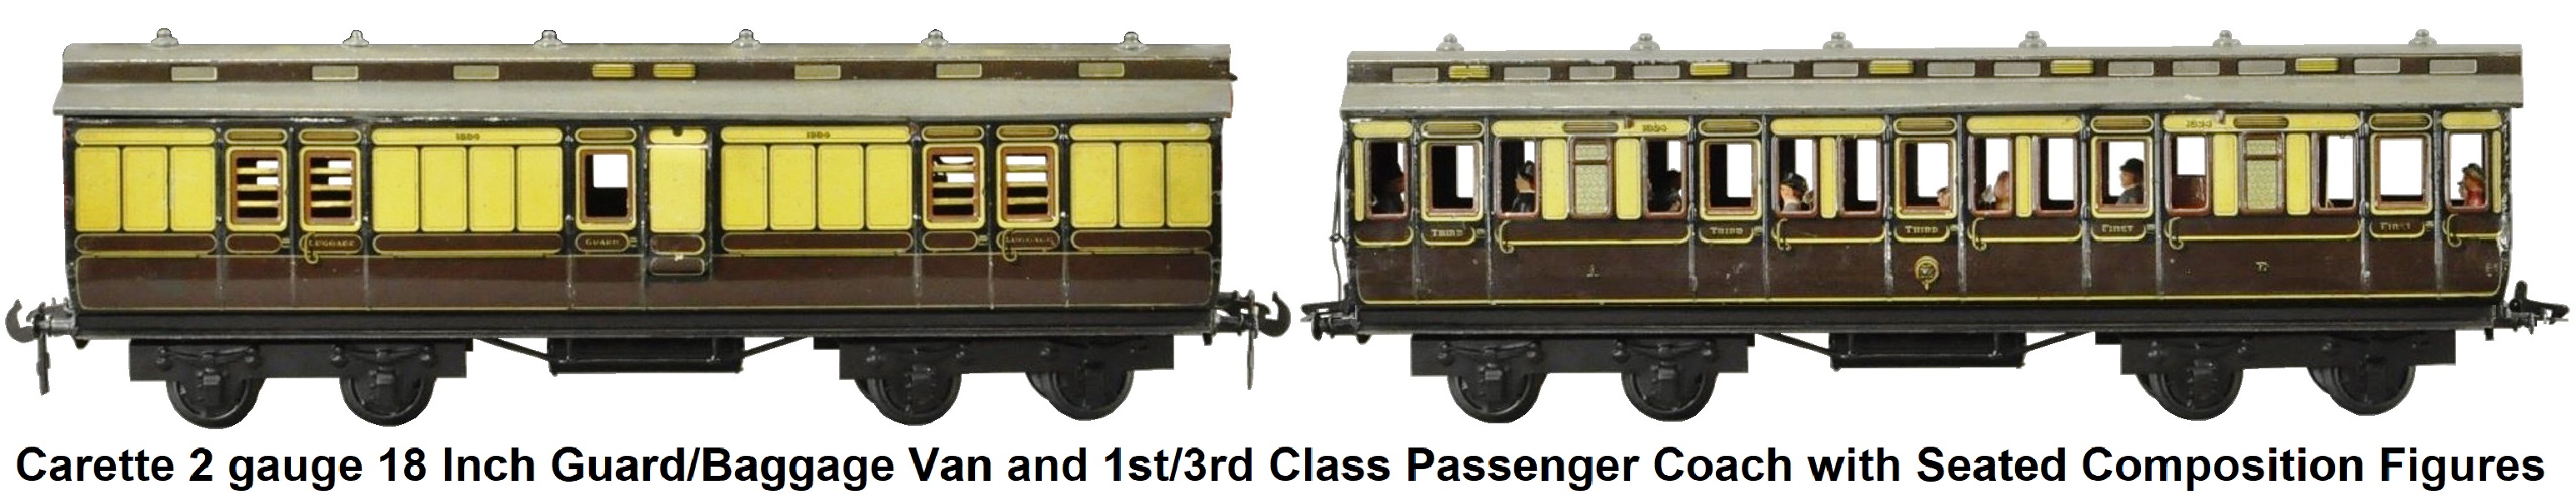 Carette 2 gauge 18 inch guard/luggage van and 1st/3rd Class coach with seated composition figures